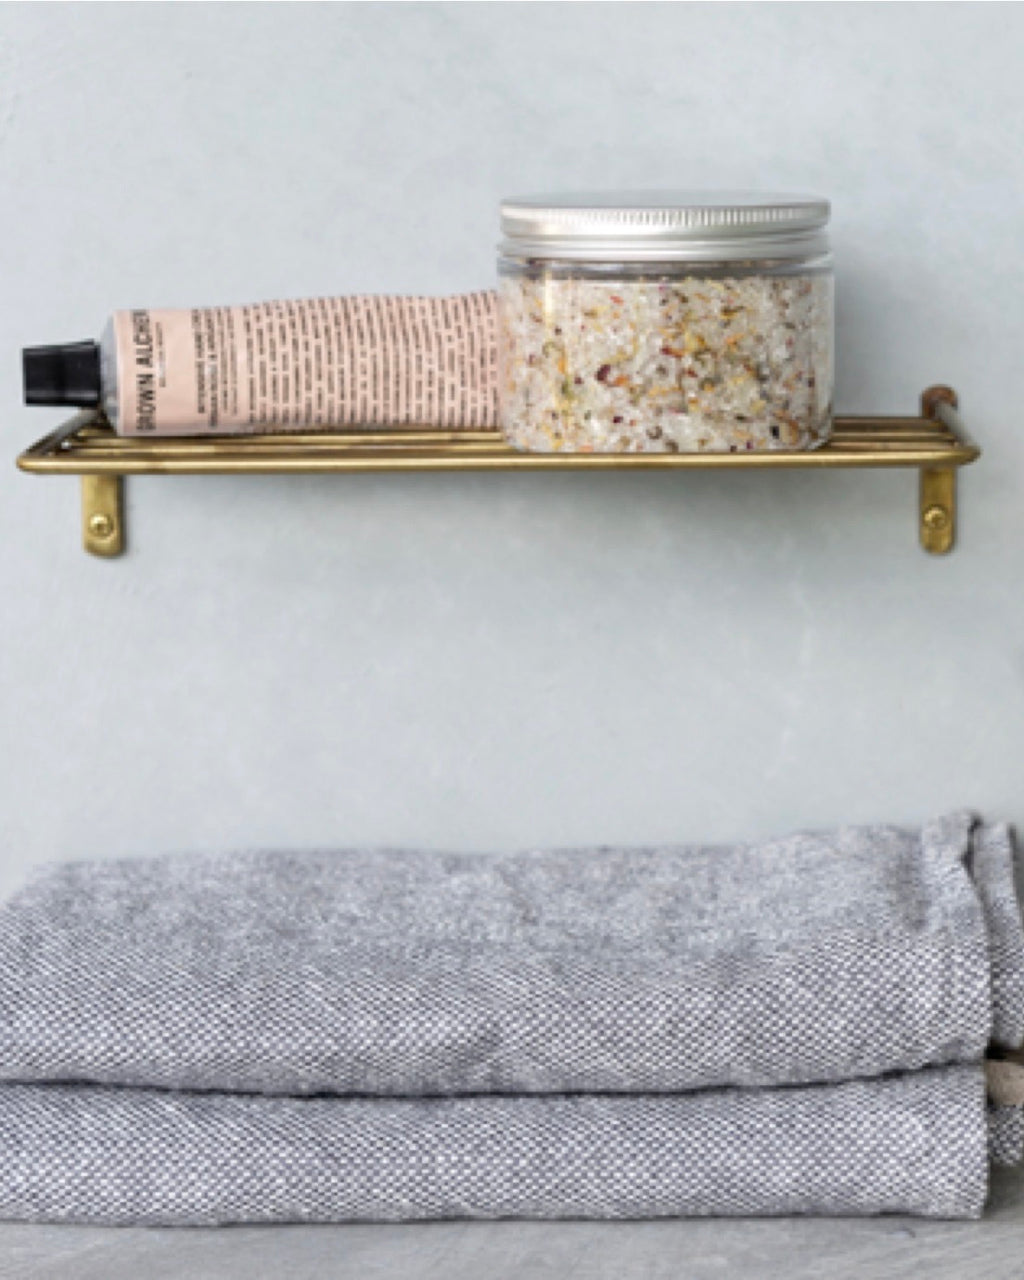 Simple brass wire shelf with jar of bath salts and salve resting on top